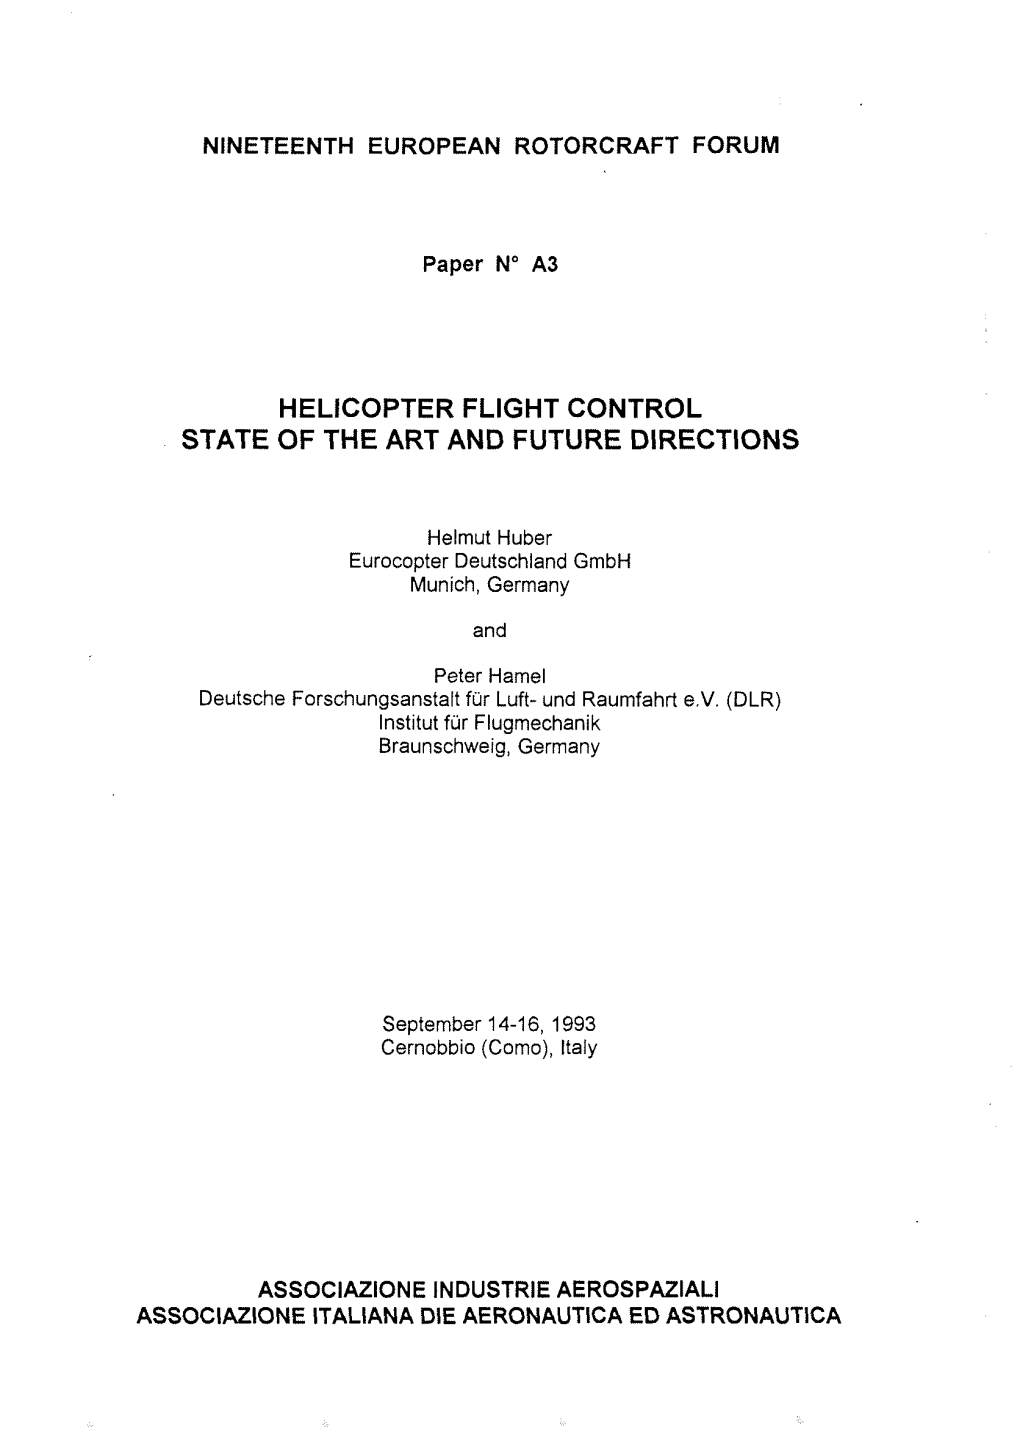 Helicopter Flight Control State of the Art and Future Directions